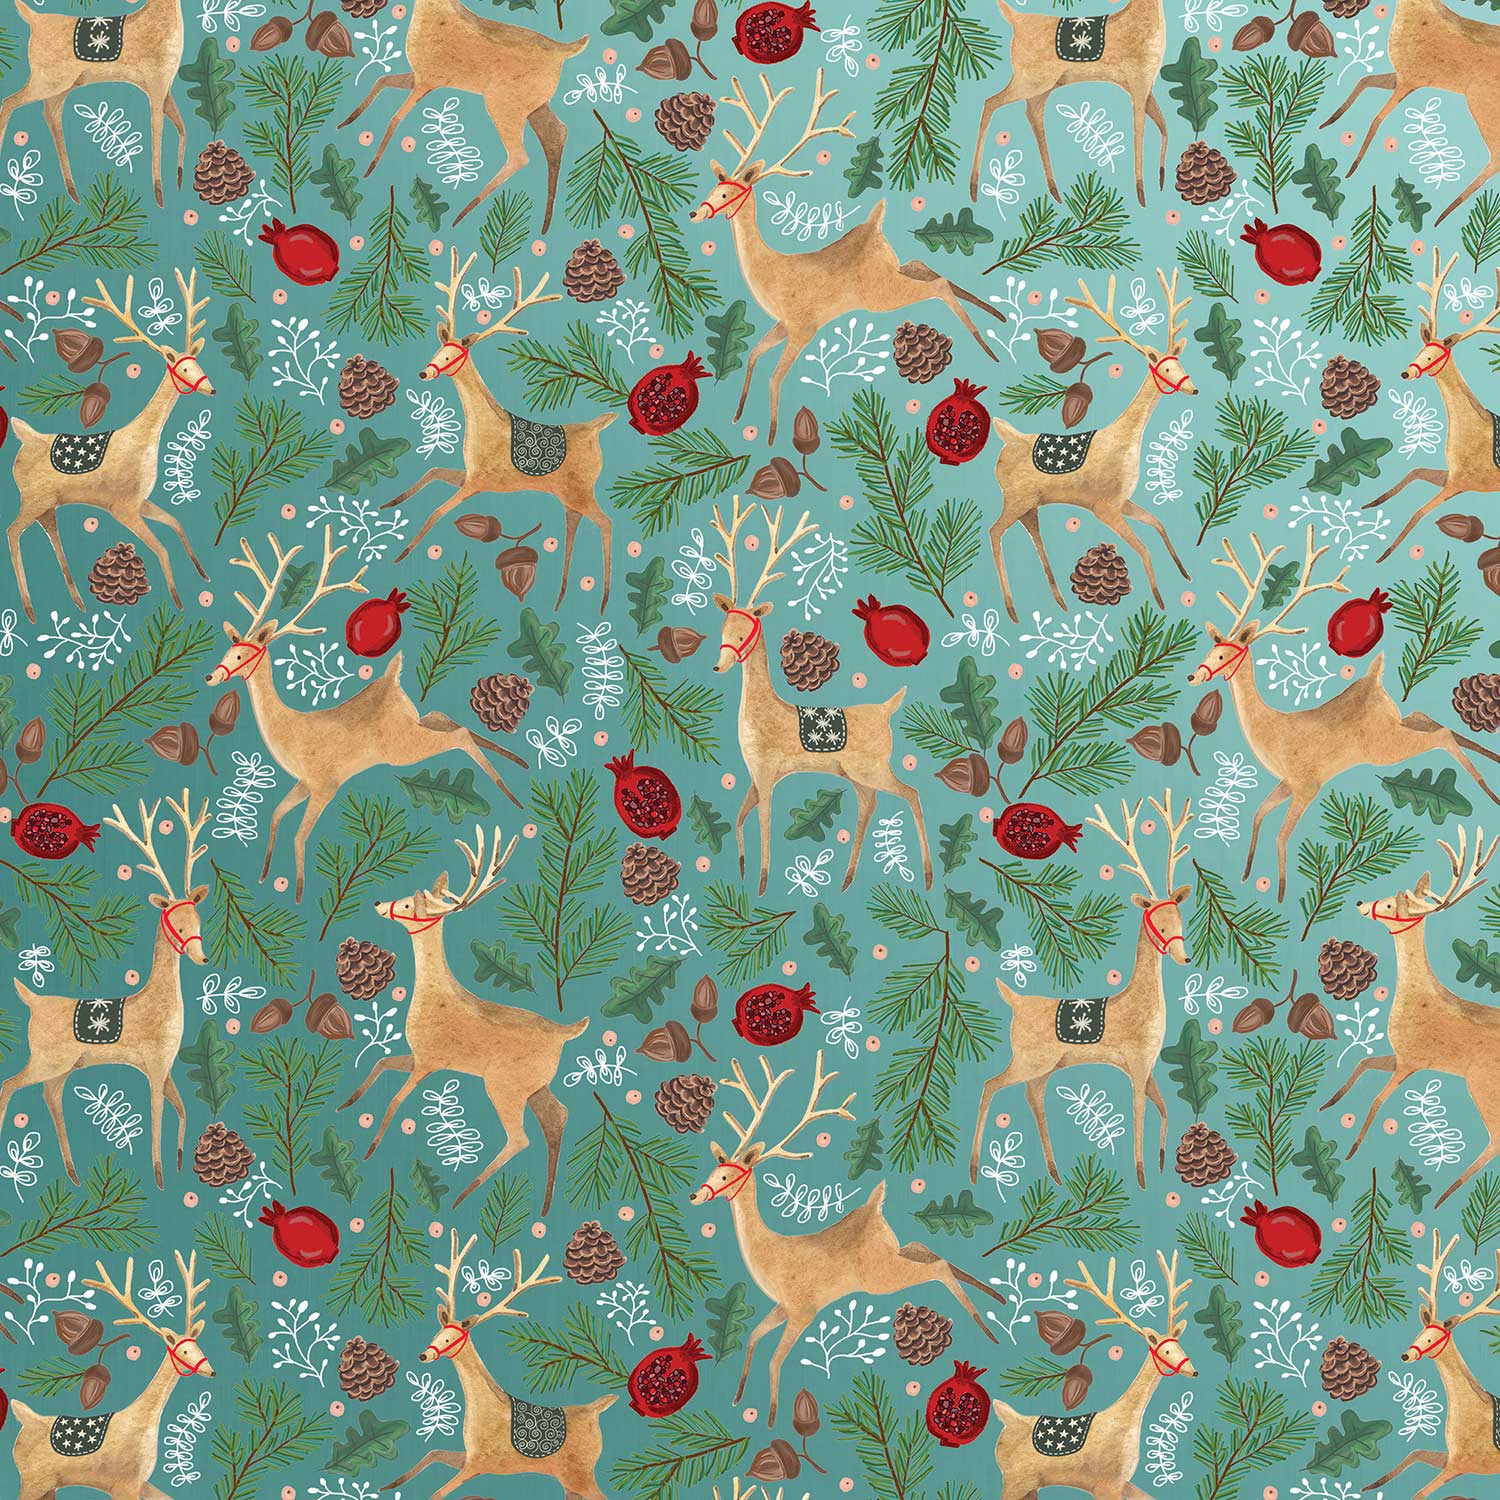 XB561a Reindeer Christmas Gift Wrapping Paper Swatch 